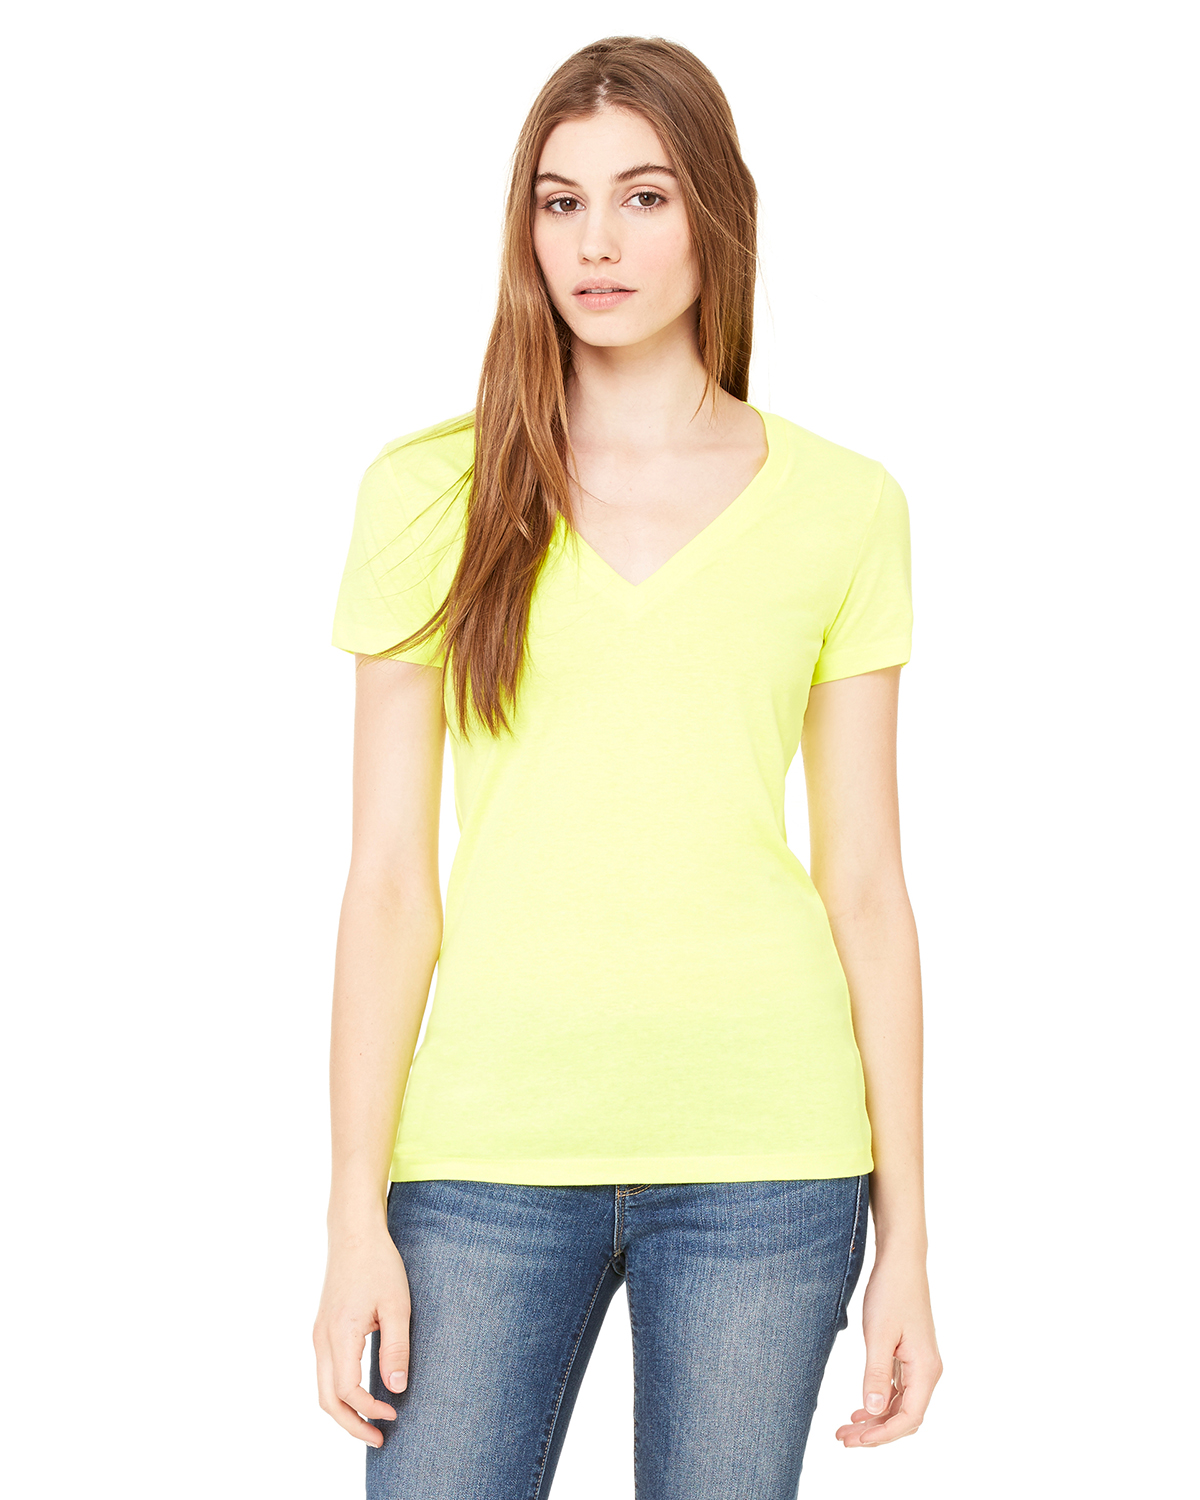 click to view NEON YELLOW